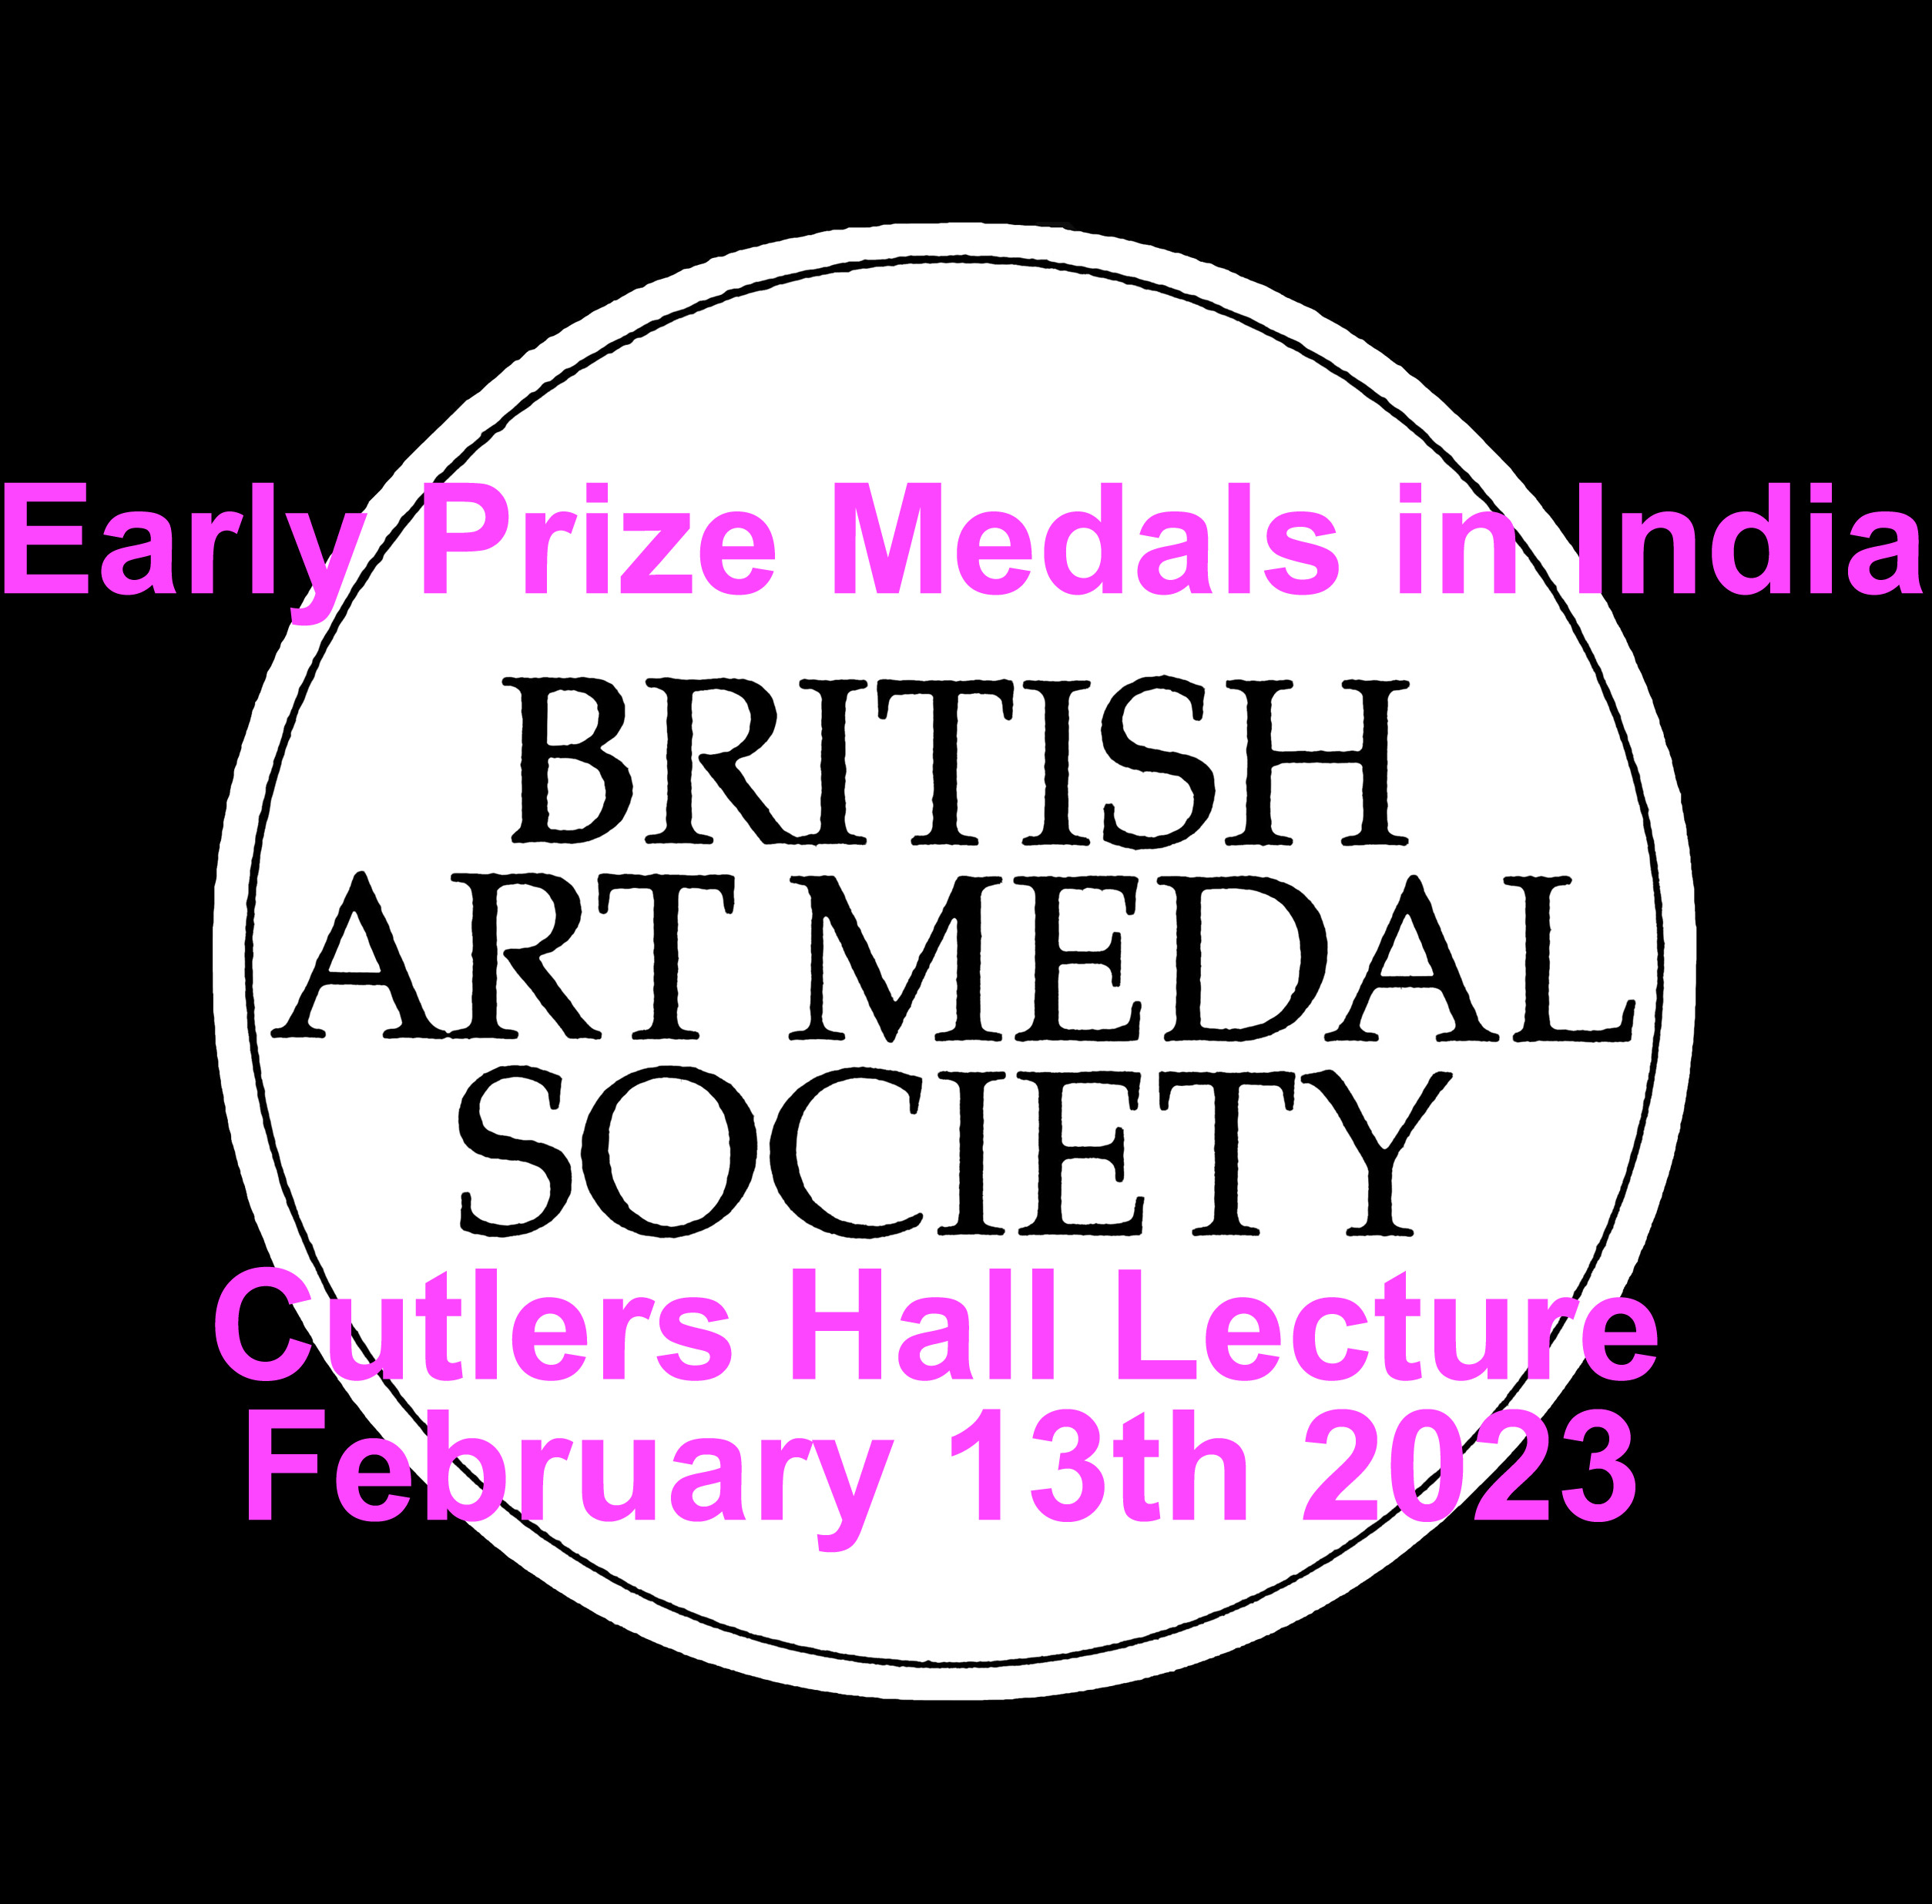 Early Prize medals in India